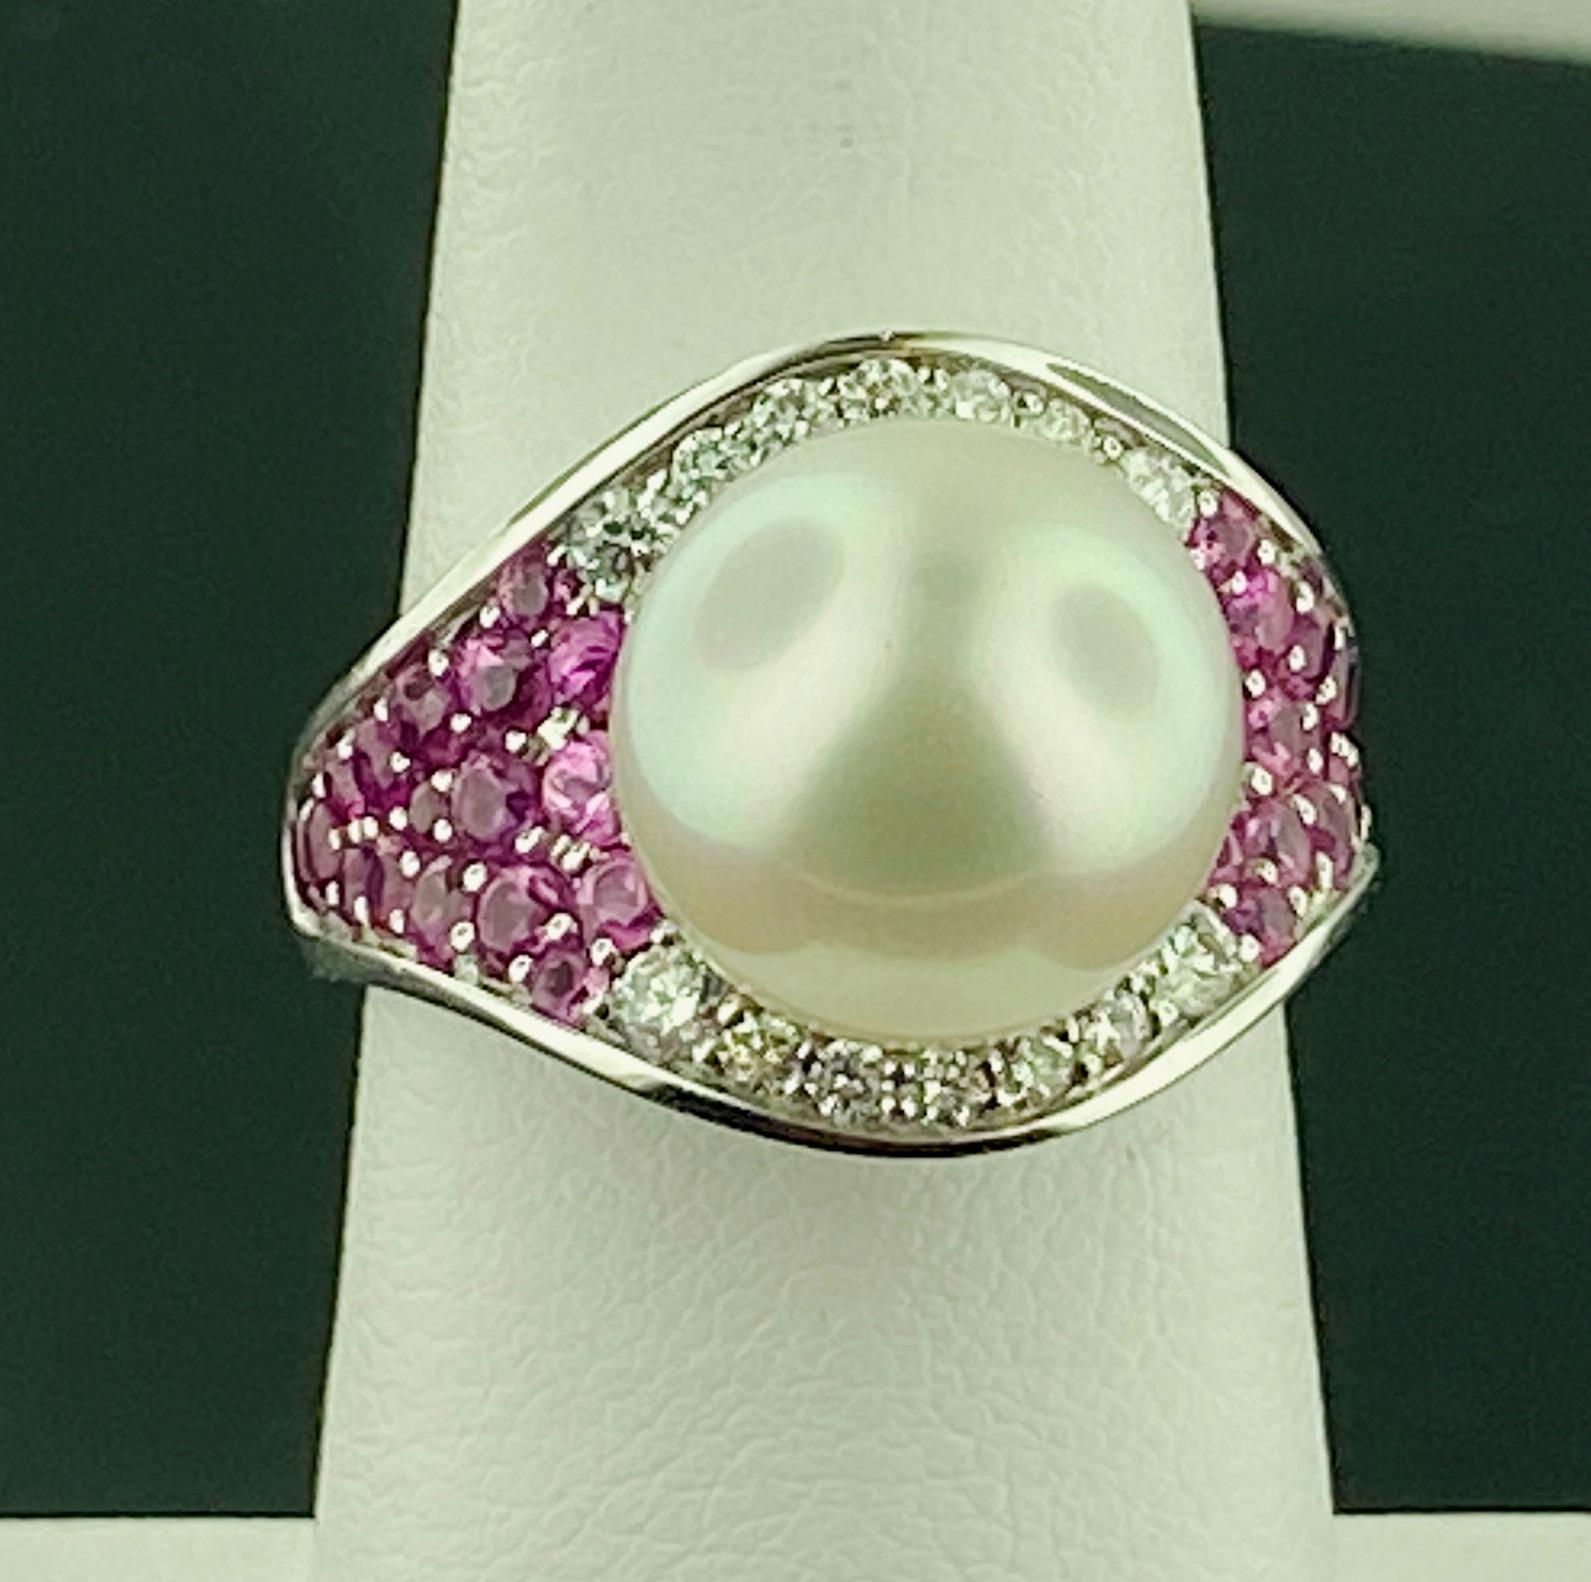 Set in 18 karat white gold, weighing 13.68 grams, is one white South Sea Pearl, measuring 11.85 millimeters, with 34 Round Brilliant Cut Pink Sapphires weighing 1.35 carats and 14 Round Brilliant Cut diamonds weighing 0.25 carats, Color Grade of: